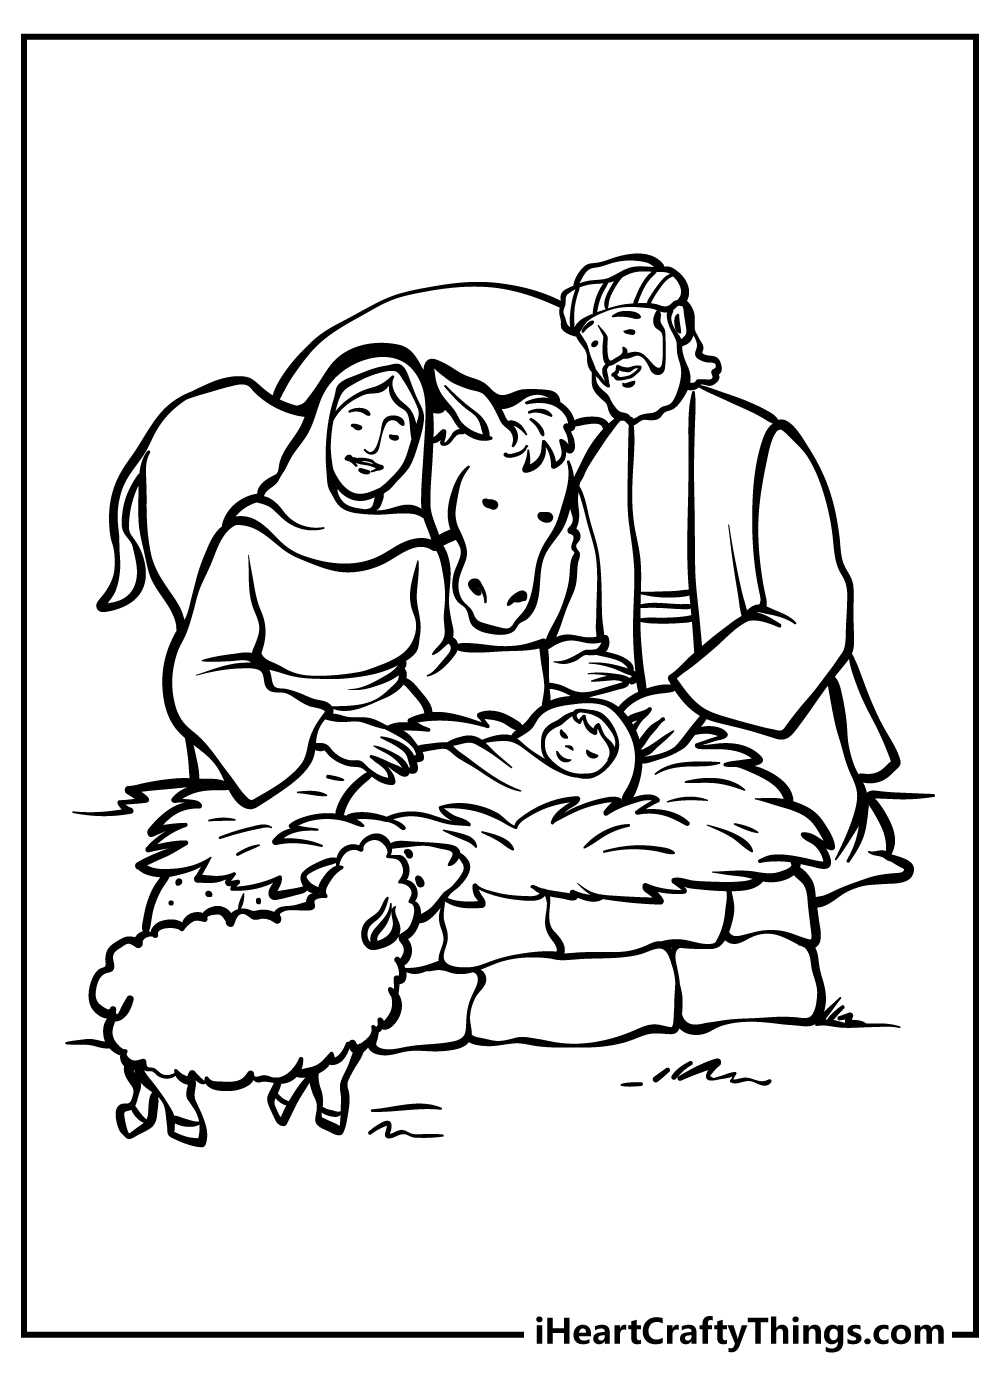 Coloring Pages For The Birth Of Jesus